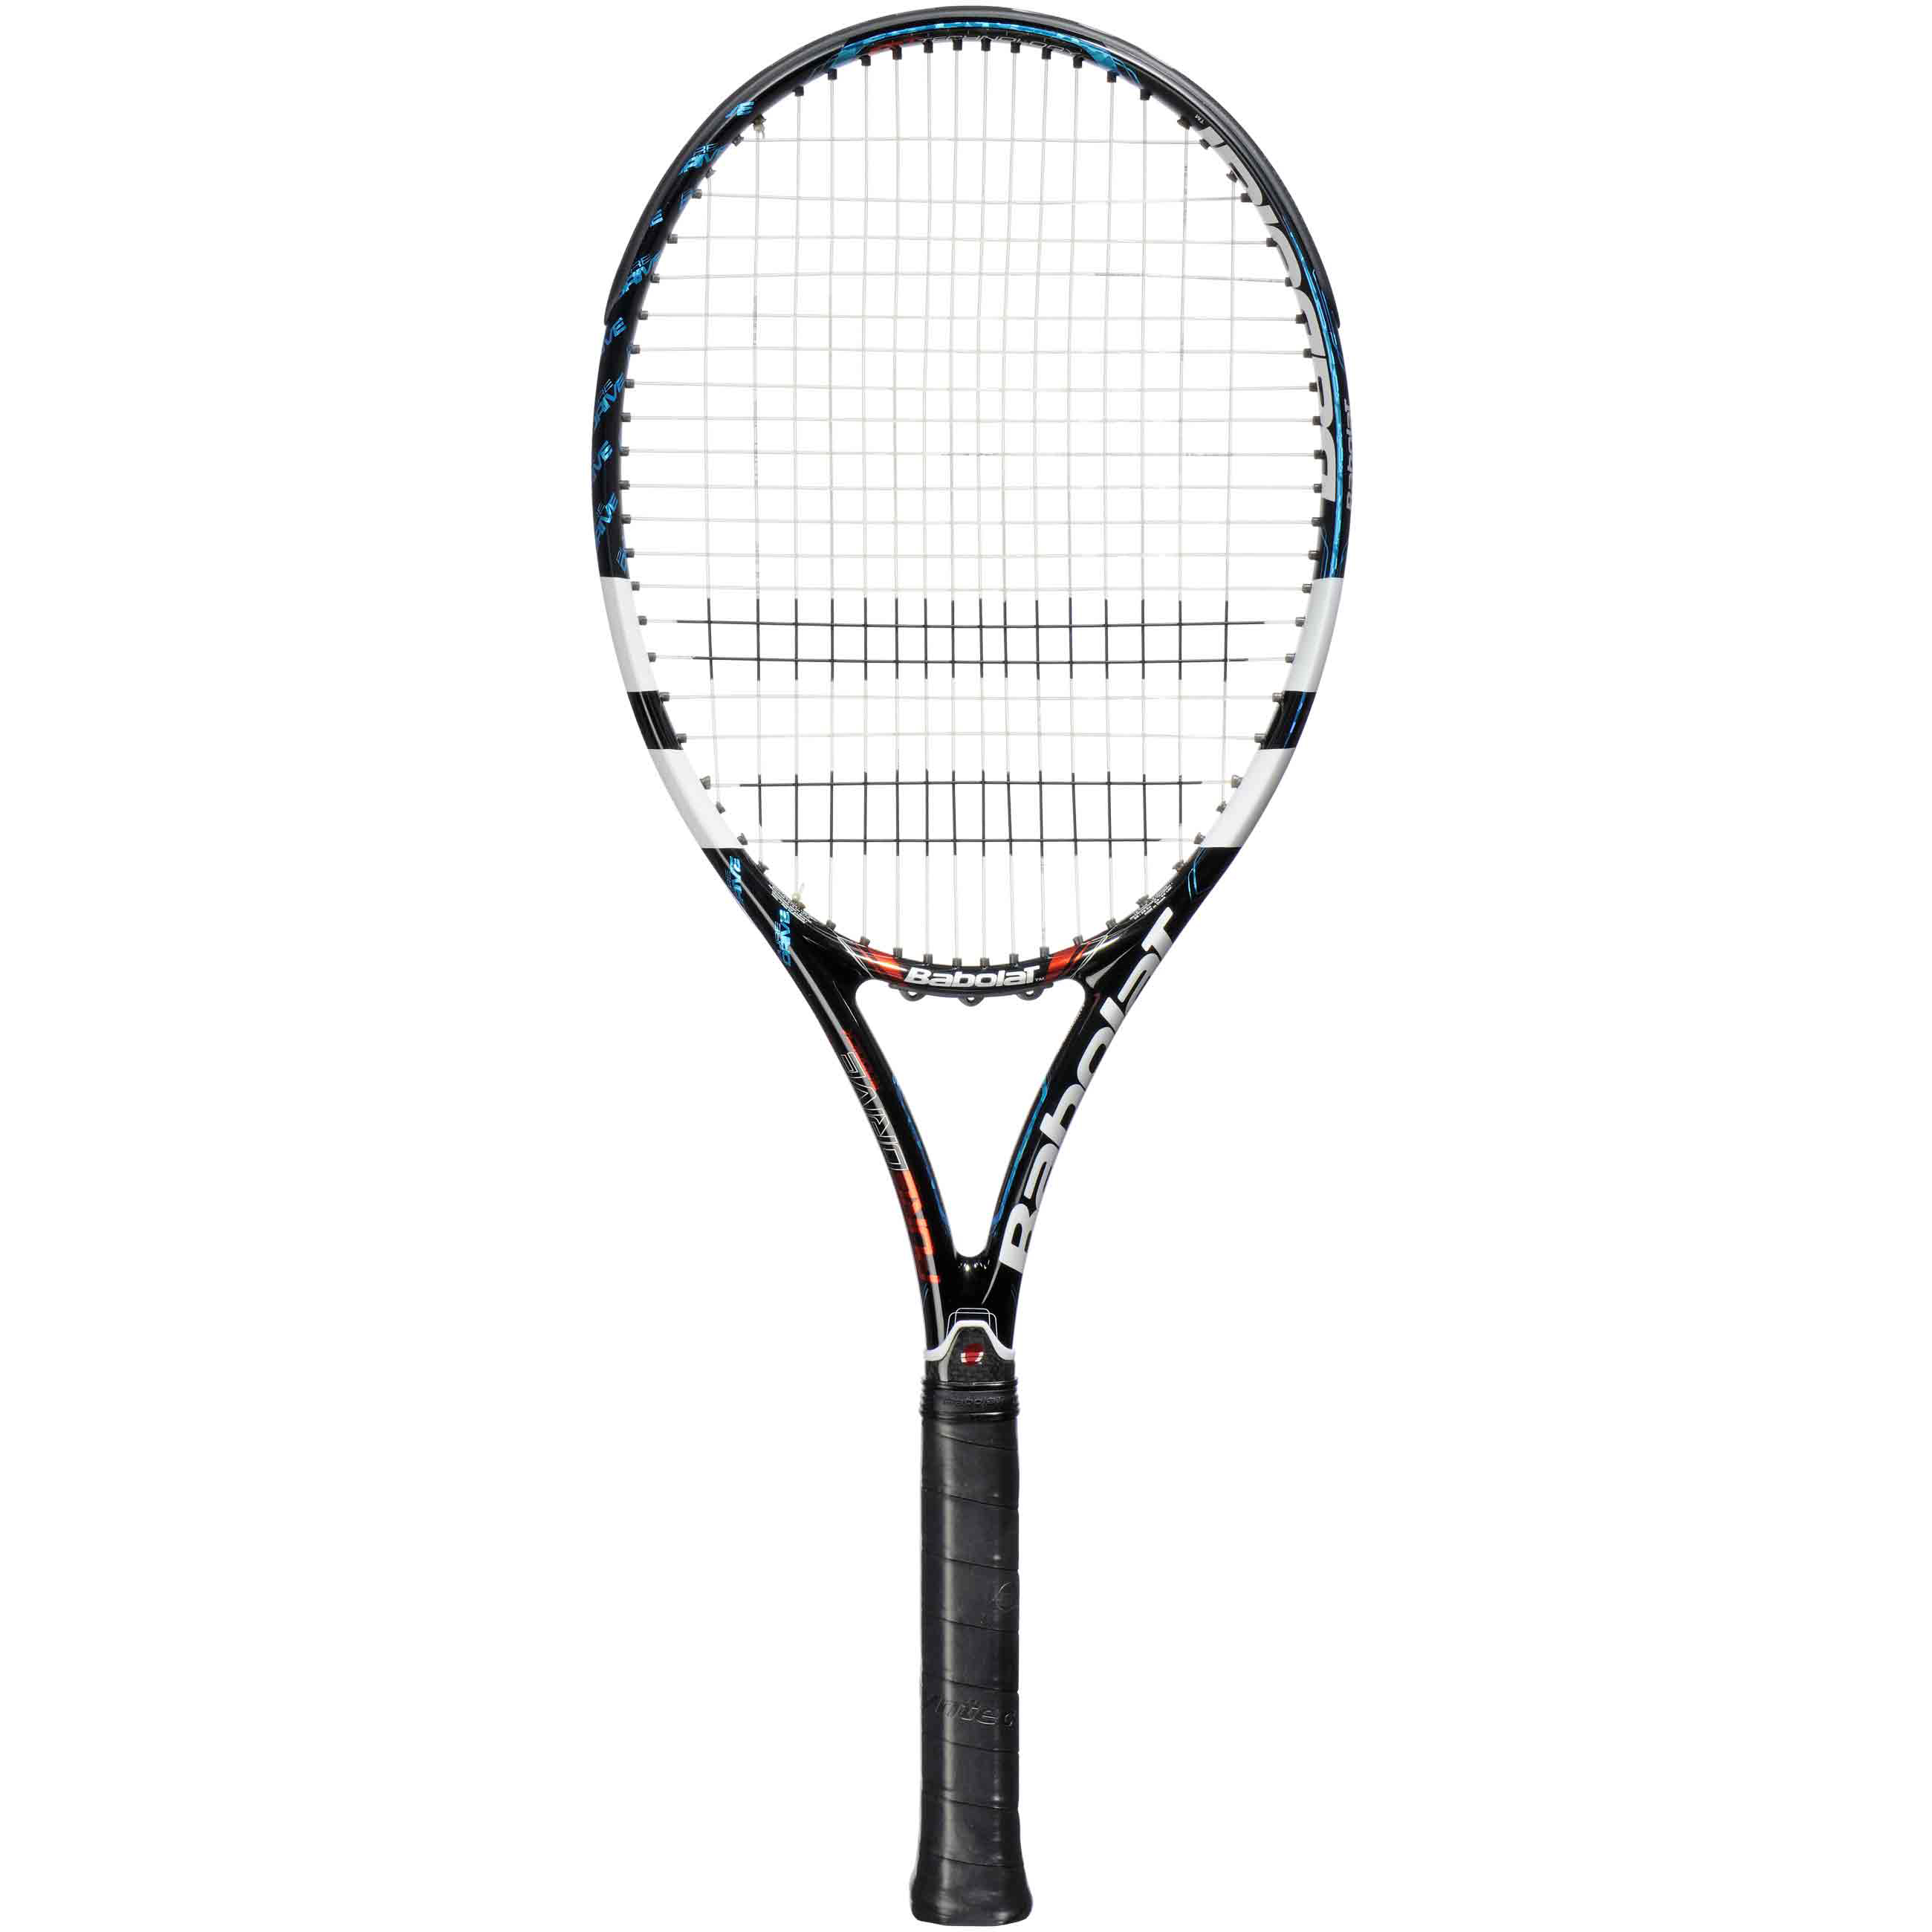 Pictures of tennis rackets clipart